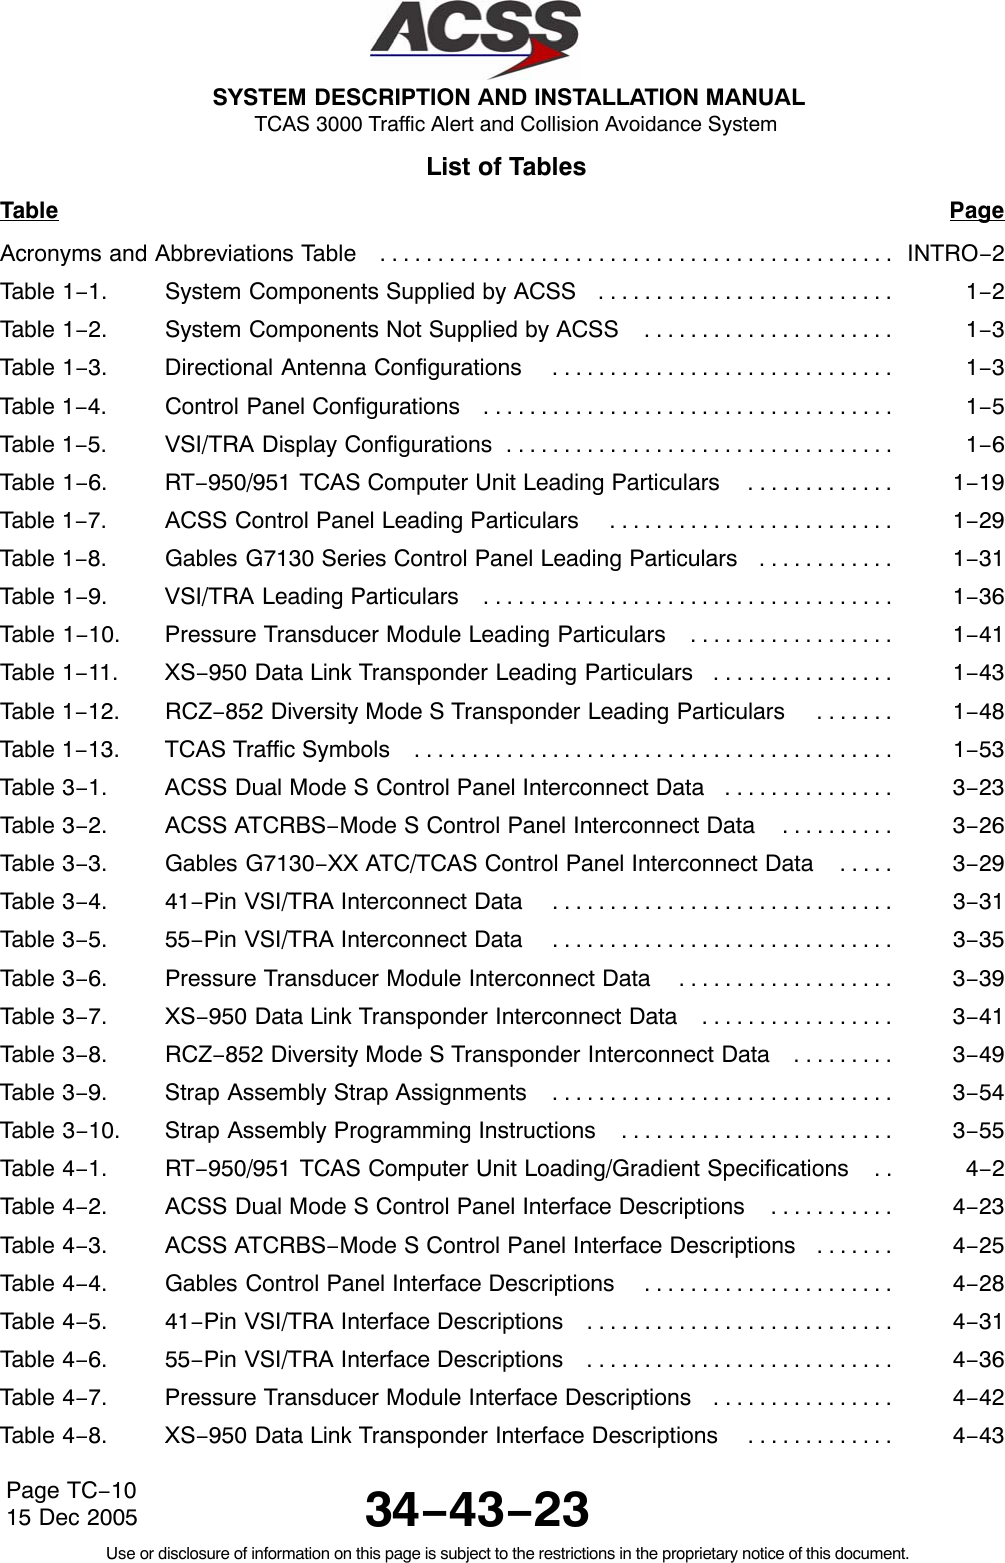 SYSTEM DESCRIPTION AND INSTALLATION MANUAL TCAS 3000 Traffic Alert and Collision Avoidance System34−43−23Use or disclosure of information on this page is subject to the restrictions in the proprietary notice of this document.Page TC−1015 Dec 2005List of TablesTable PageAcronyms and Abbreviations Table   INTRO−2. . . . . . . . . . . . . . . . . . . . . . . . . . . . . . . . . . . . . . . . . . . . . Table 1−1. System Components Supplied by ACSS   1−2. . . . . . . . . . . . . . . . . . . . . . . . . . Table 1−2. System Components Not Supplied by ACSS   1−3. . . . . . . . . . . . . . . . . . . . . . Table 1−3. Directional Antenna Configurations   1−3. . . . . . . . . . . . . . . . . . . . . . . . . . . . . . Table 1−4.  Control Panel Configurations   1−5. . . . . . . . . . . . . . . . . . . . . . . . . . . . . . . . . . . . Table 1−5.  VSI/TRA Display Configurations  1−6. . . . . . . . . . . . . . . . . . . . . . . . . . . . . . . . . . Table 1−6. RT−950/951 TCAS Computer Unit Leading Particulars   1−19. . . . . . . . . . . . . Table 1−7.  ACSS Control Panel Leading Particulars   1−29. . . . . . . . . . . . . . . . . . . . . . . . . Table 1−8.  Gables G7130 Series Control Panel Leading Particulars   1−31. . . . . . . . . . . . Table 1−9. VSI/TRA Leading Particulars   1−36. . . . . . . . . . . . . . . . . . . . . . . . . . . . . . . . . . . . Table 1−10. Pressure Transducer Module Leading Particulars   1−41. . . . . . . . . . . . . . . . . . Table 1−11. XS−950 Data Link Transponder Leading Particulars  1−43. . . . . . . . . . . . . . . . Table 1−12. RCZ−852 Diversity Mode S Transponder Leading Particulars   1−48. . . . . . . Table 1−13.  TCAS Traffic Symbols   1−53. . . . . . . . . . . . . . . . . . . . . . . . . . . . . . . . . . . . . . . . . . Table 3−1. ACSS Dual Mode S Control Panel Interconnect Data   3−23. . . . . . . . . . . . . . . Table 3−2. ACSS ATCRBS−Mode S Control Panel Interconnect Data   3−26. . . . . . . . . . Table 3−3. Gables G7130−XX ATC/TCAS Control Panel Interconnect Data   3−29. . . . . Table 3−4. 41−Pin VSI/TRA Interconnect Data   3−31. . . . . . . . . . . . . . . . . . . . . . . . . . . . . . Table 3−5. 55−Pin VSI/TRA Interconnect Data   3−35. . . . . . . . . . . . . . . . . . . . . . . . . . . . . . Table 3−6. Pressure Transducer Module Interconnect Data   3−39. . . . . . . . . . . . . . . . . . . Table 3−7. XS−950 Data Link Transponder Interconnect Data   3−41. . . . . . . . . . . . . . . . . Table 3−8. RCZ−852 Diversity Mode S Transponder Interconnect Data   3−49. . . . . . . . . Table 3−9. Strap Assembly Strap Assignments   3−54. . . . . . . . . . . . . . . . . . . . . . . . . . . . . . Table 3−10. Strap Assembly Programming Instructions   3−55. . . . . . . . . . . . . . . . . . . . . . . . Table 4−1. RT−950/951 TCAS Computer Unit Loading/Gradient Specifications   4−2. . Table 4−2. ACSS Dual Mode S Control Panel Interface Descriptions   4−23. . . . . . . . . . . Table 4−3. ACSS ATCRBS−Mode S Control Panel Interface Descriptions   4−25. . . . . . . Table 4−4. Gables Control Panel Interface Descriptions   4−28. . . . . . . . . . . . . . . . . . . . . . Table 4−5. 41−Pin VSI/TRA Interface Descriptions   4−31. . . . . . . . . . . . . . . . . . . . . . . . . . . Table 4−6. 55−Pin VSI/TRA Interface Descriptions   4−36. . . . . . . . . . . . . . . . . . . . . . . . . . . Table 4−7. Pressure Transducer Module Interface Descriptions   4−42. . . . . . . . . . . . . . . . Table 4−8. XS−950 Data Link Transponder Interface Descriptions   4−43. . . . . . . . . . . . . 